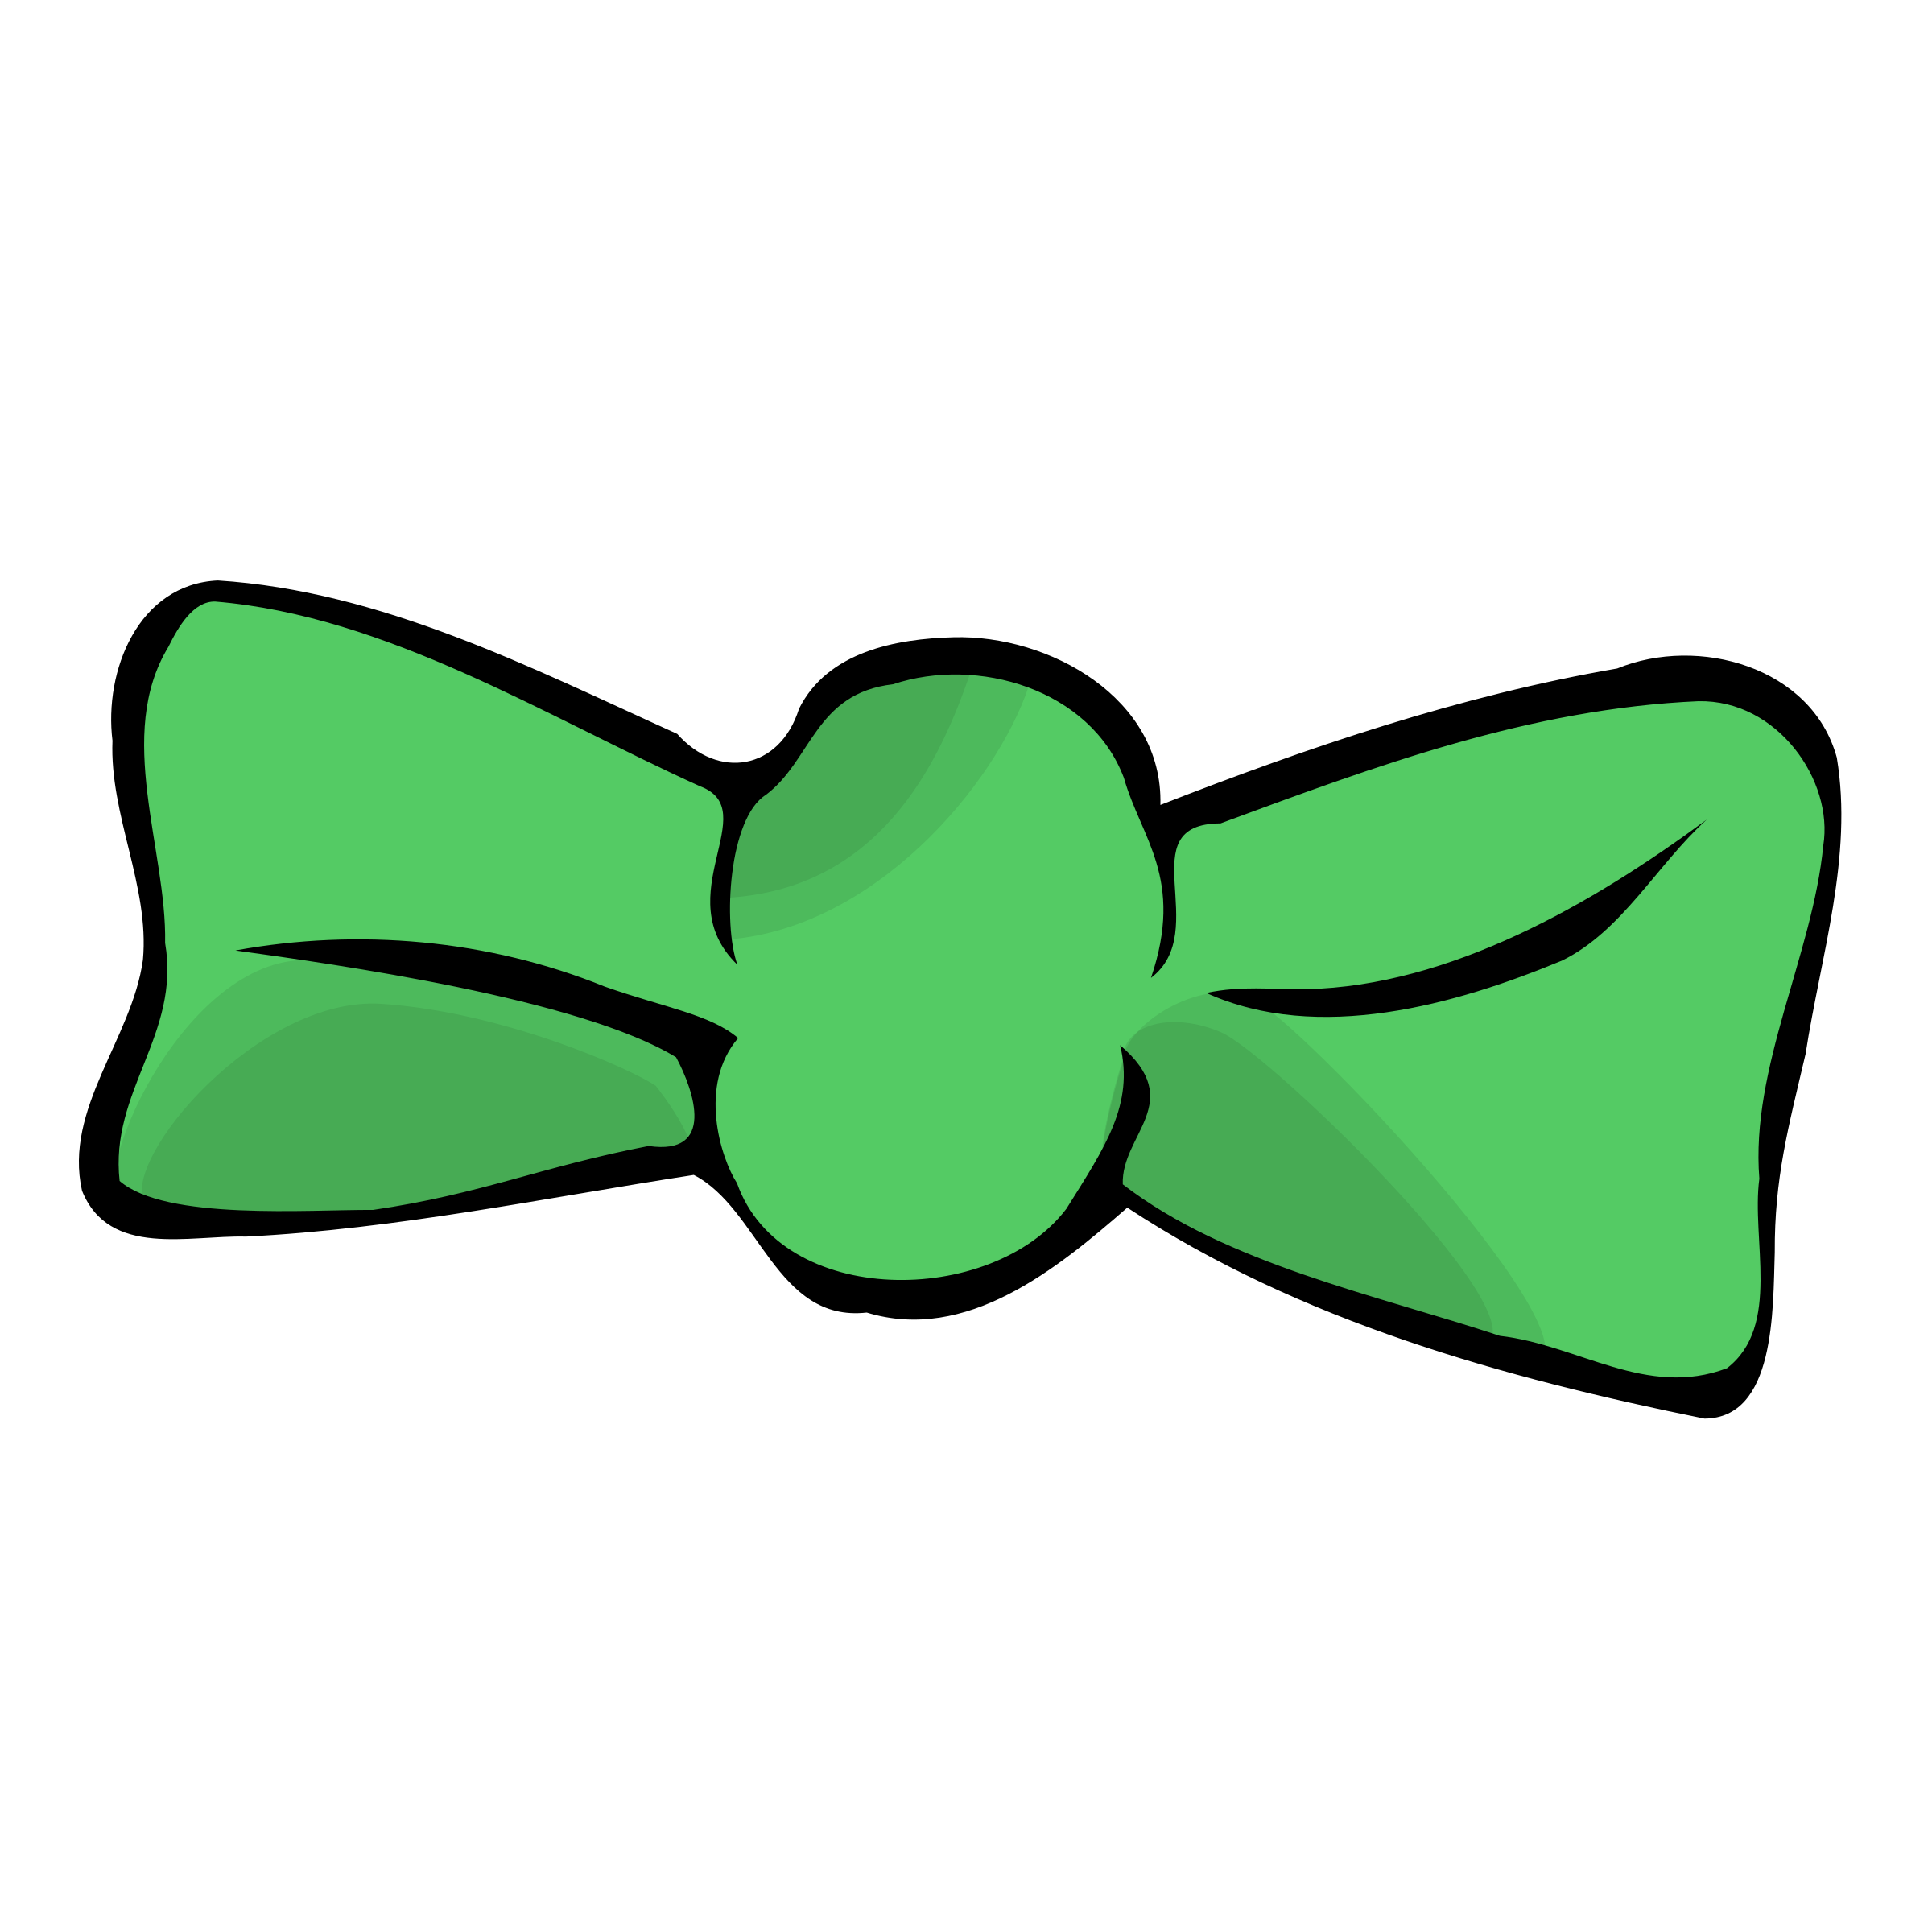 bow tie clipart images - photo #35